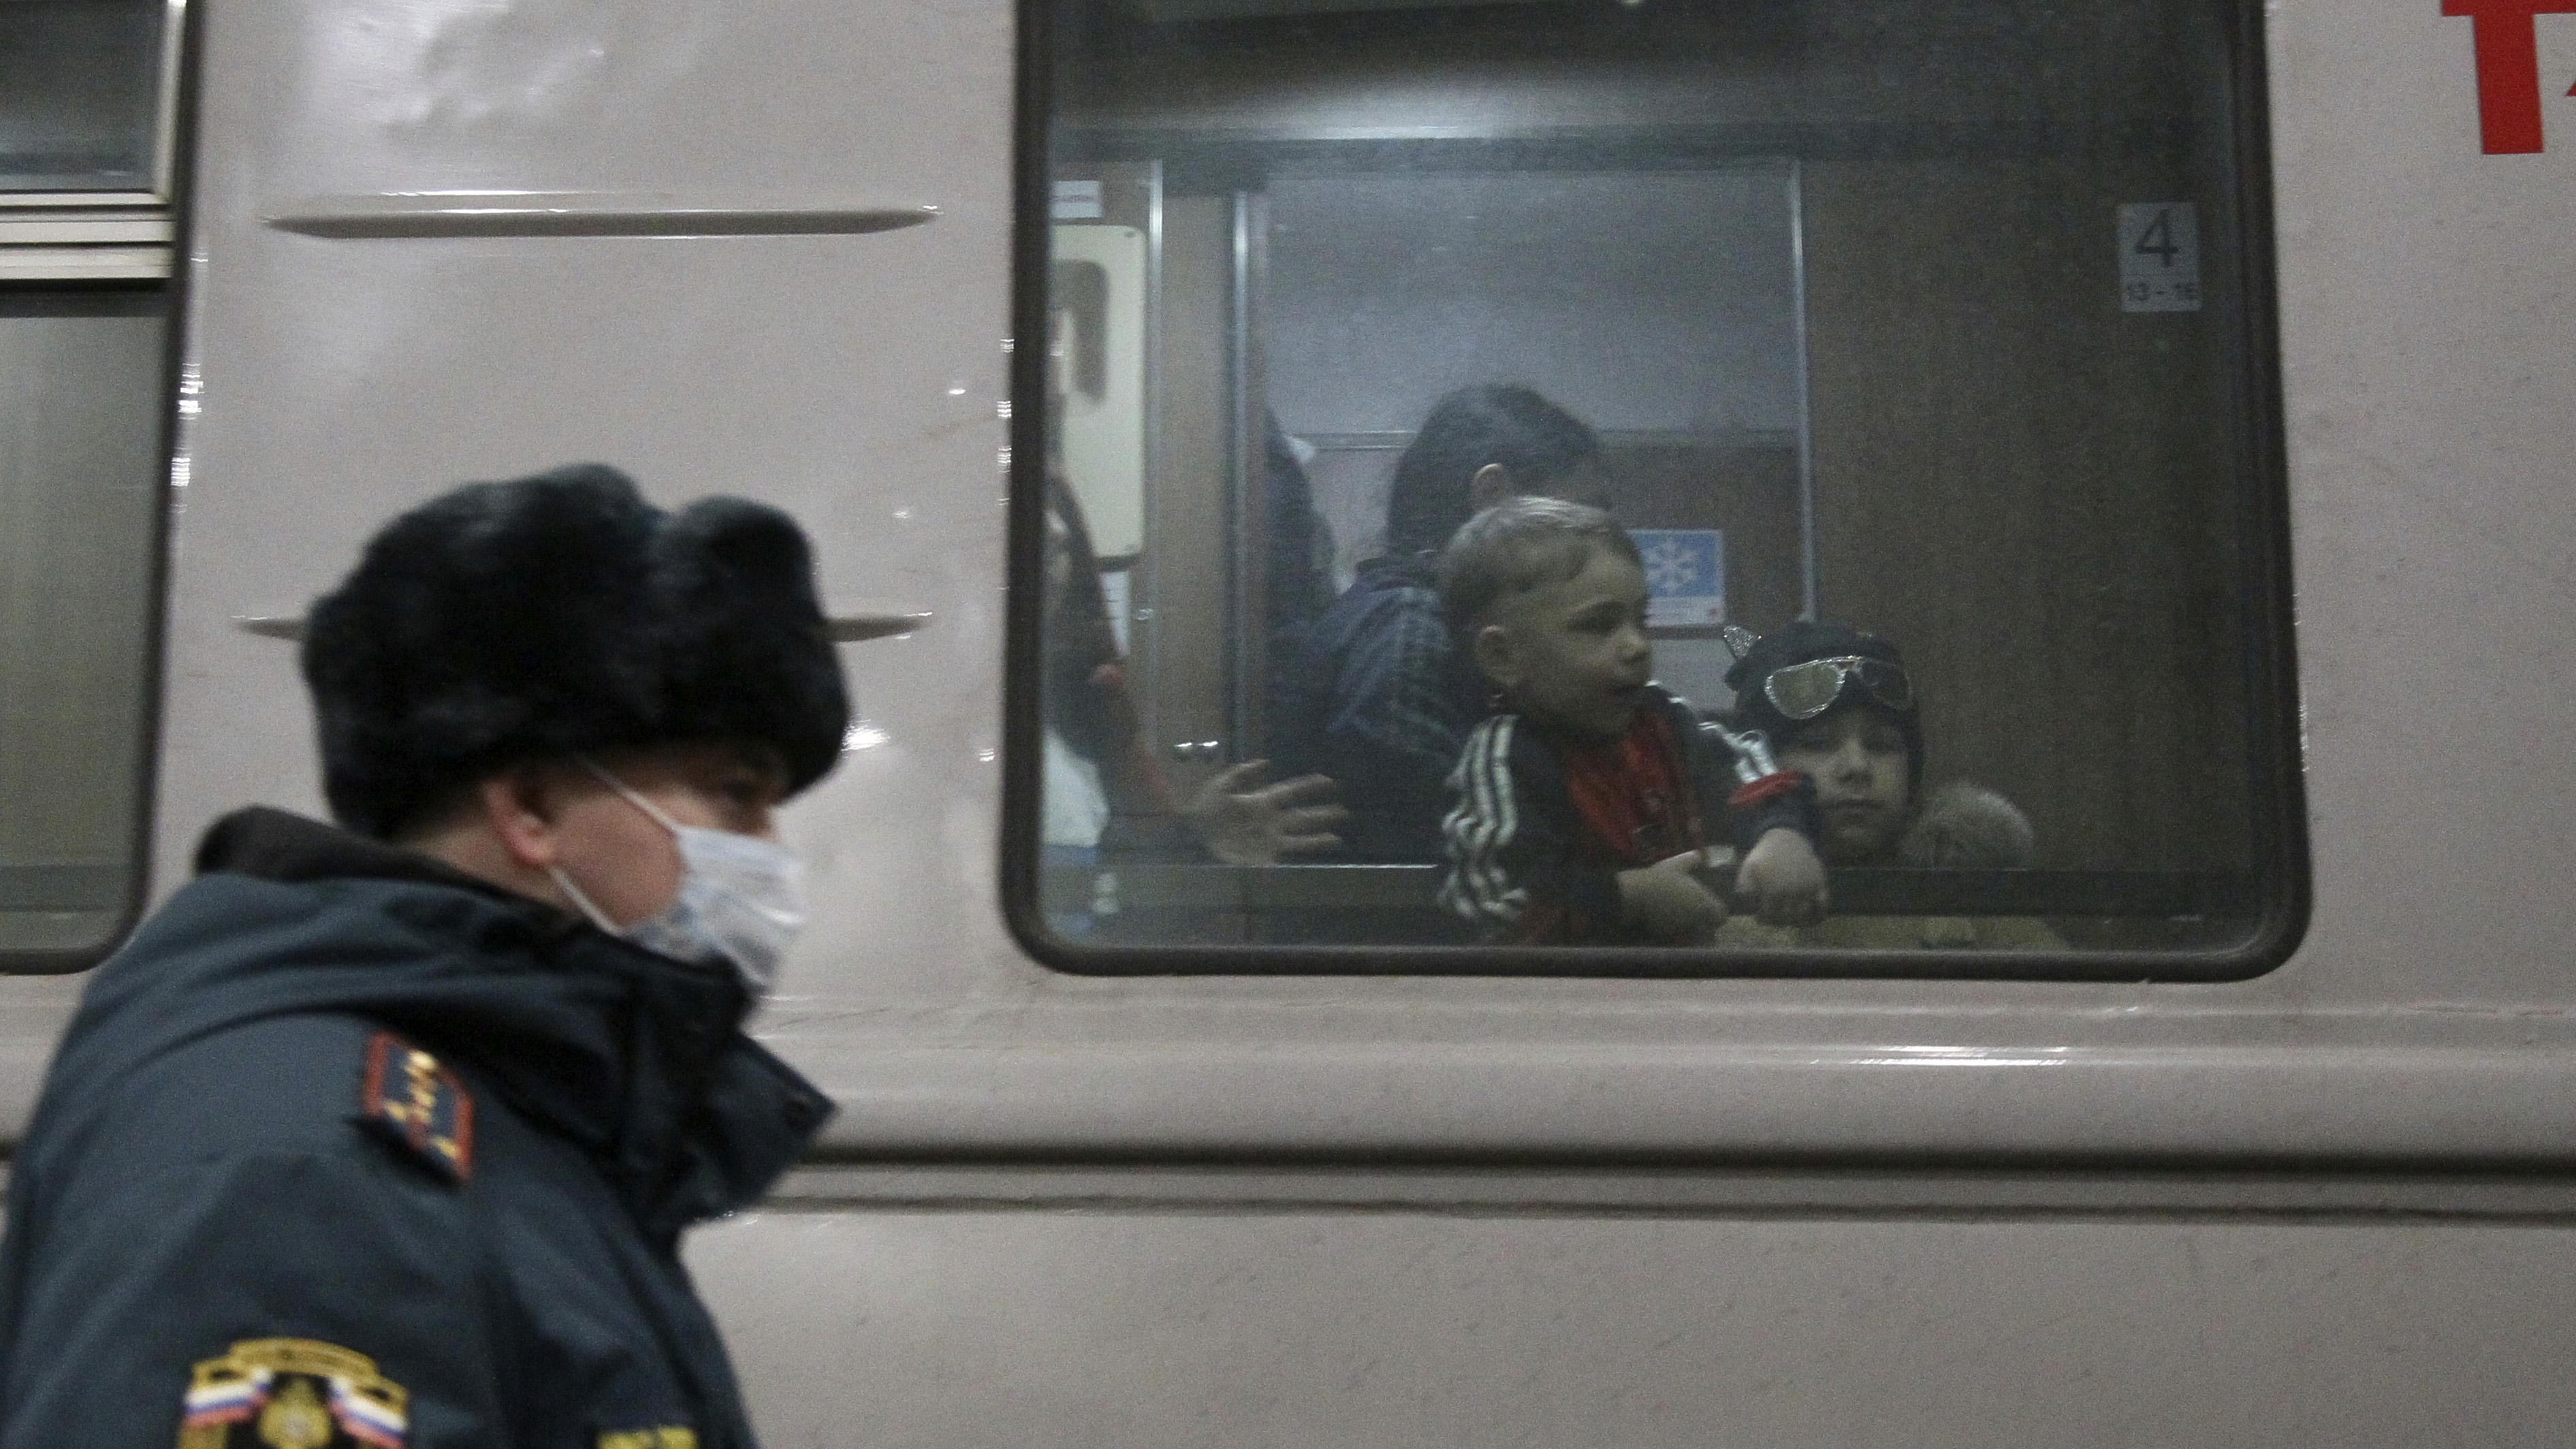 Children evacuated from the Donetsk region, the territory controlled by a pro-Russia separatist governments in eastern Ukraine, are seen through a train window as they wait to be taken to temporary housing, at the railway station in Nizhny Novgorod, Russia.